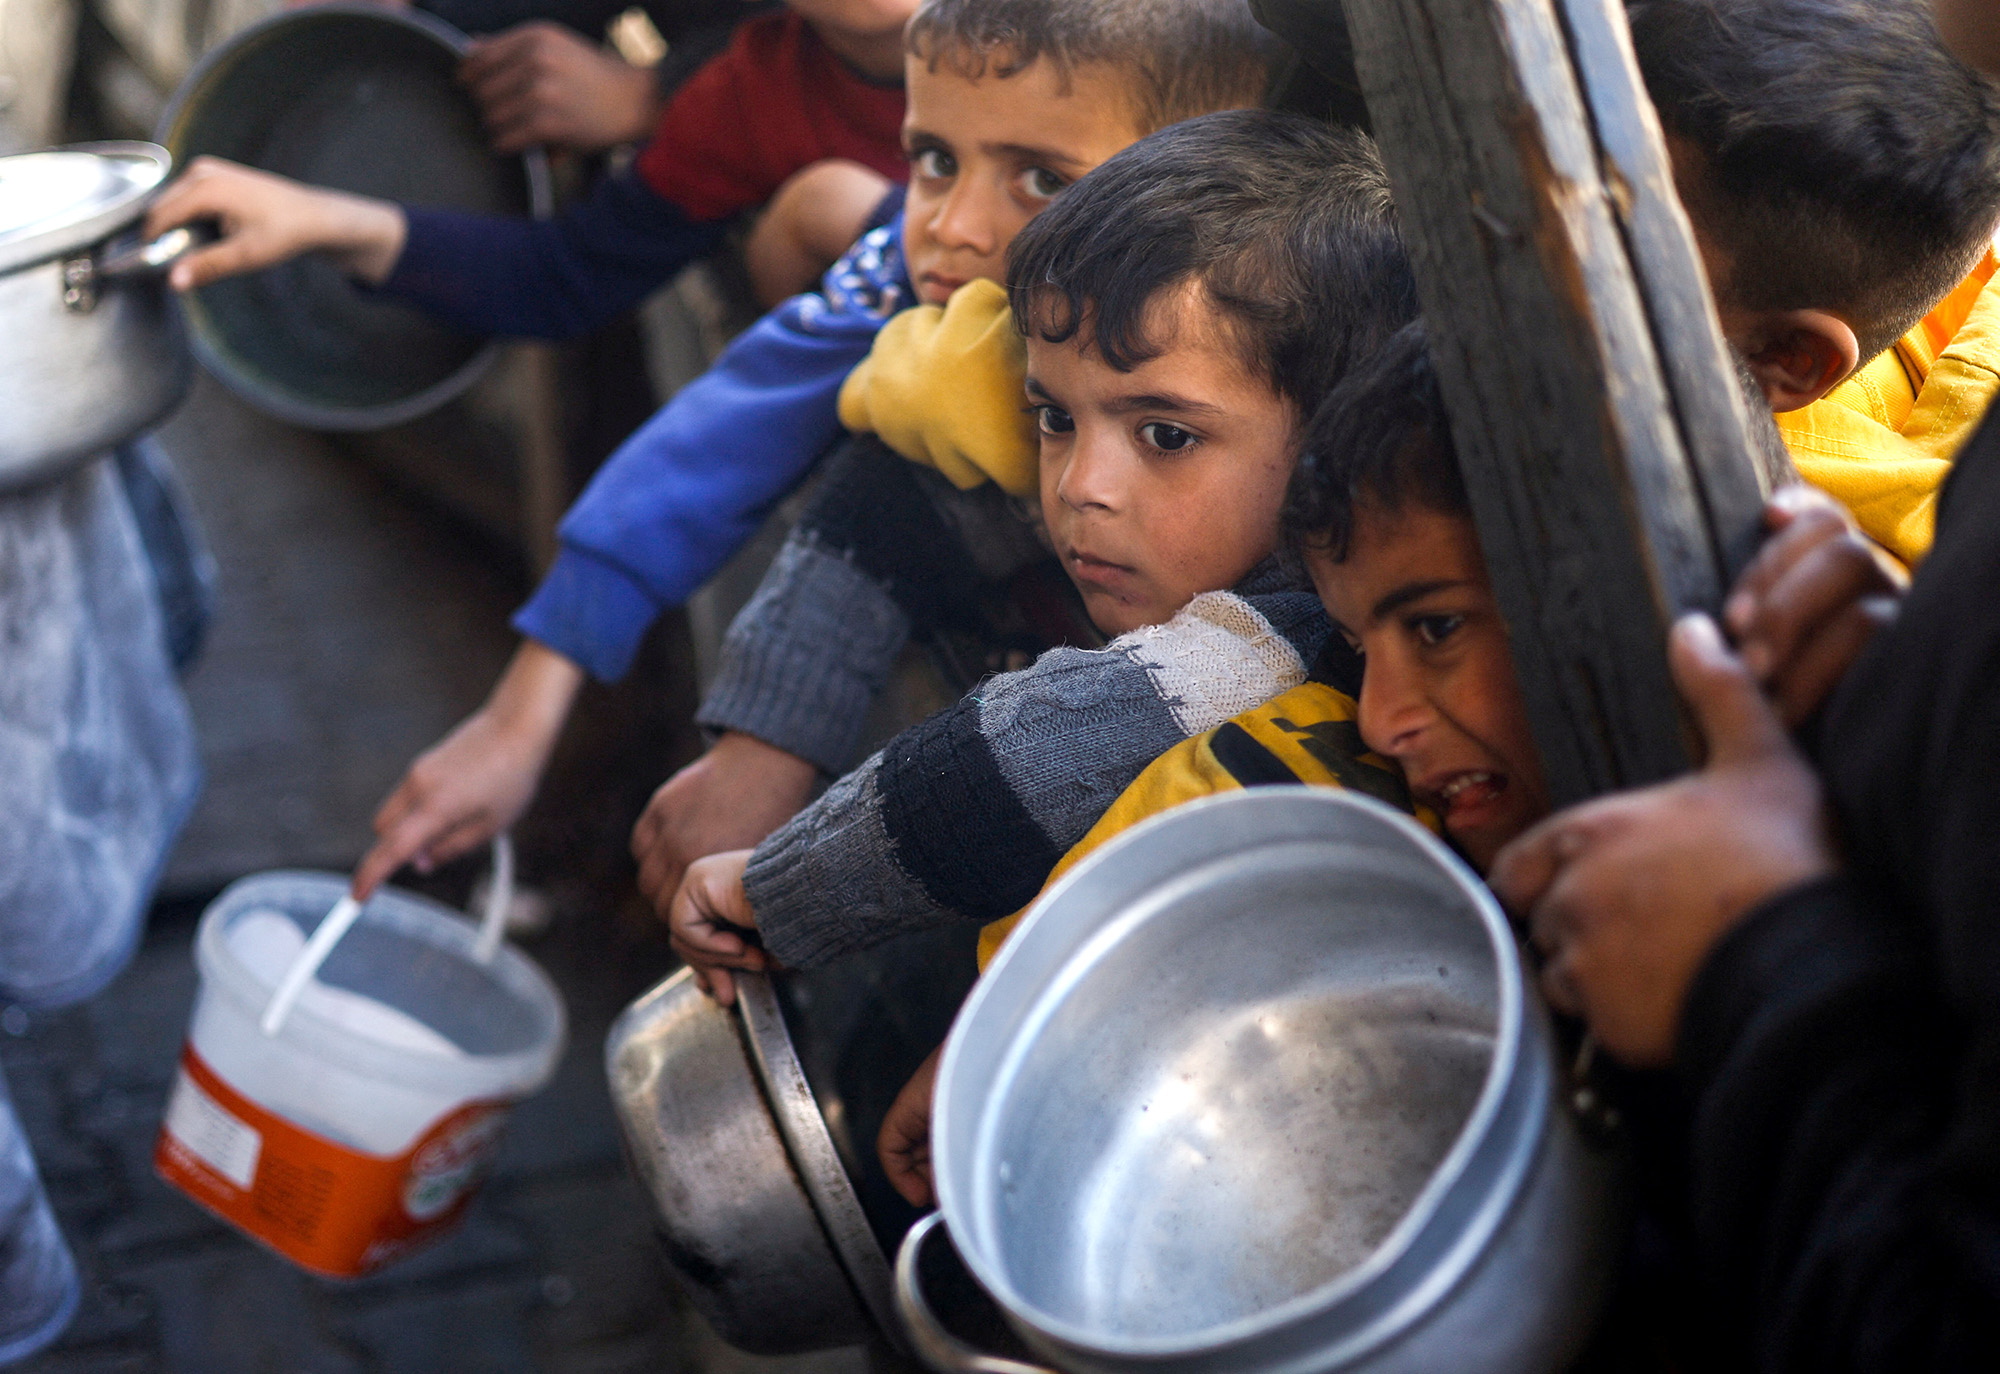 Palestinian children wait to receive food cooked by a charity kitchen amid shortages of food supplies in Rafah, Gaza, on March 5.